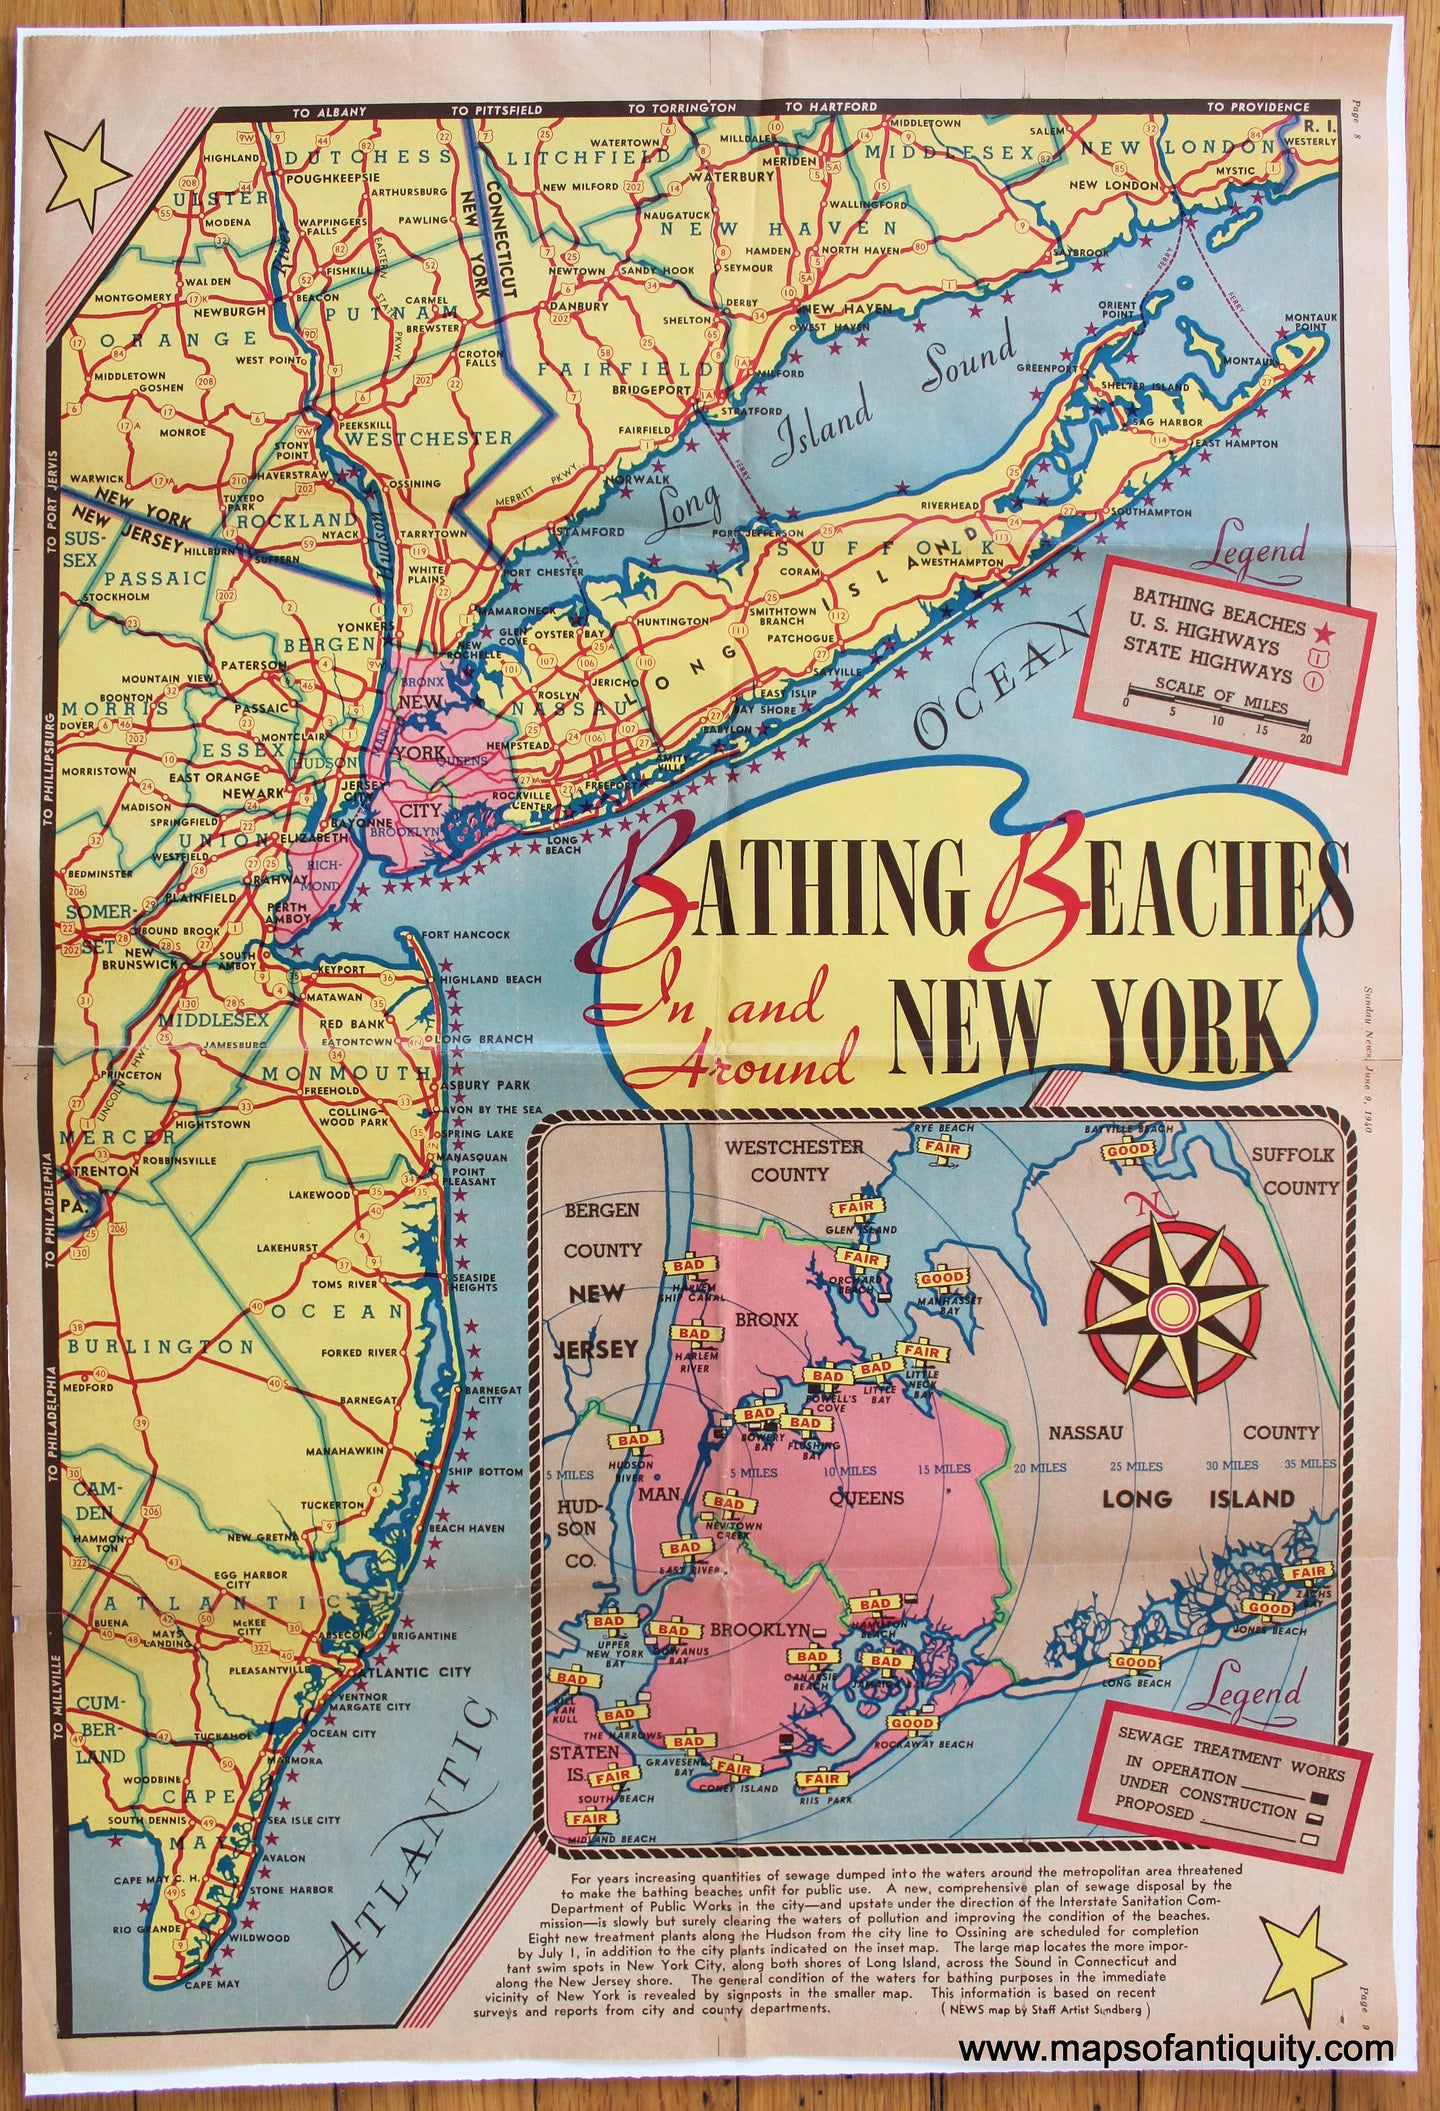 Antique-Pictorial-Map-Bathing-Beaches-In-and-Around-New-York-1940-Sunday-News---1900s-20th-century-Maps-of-Antiquity